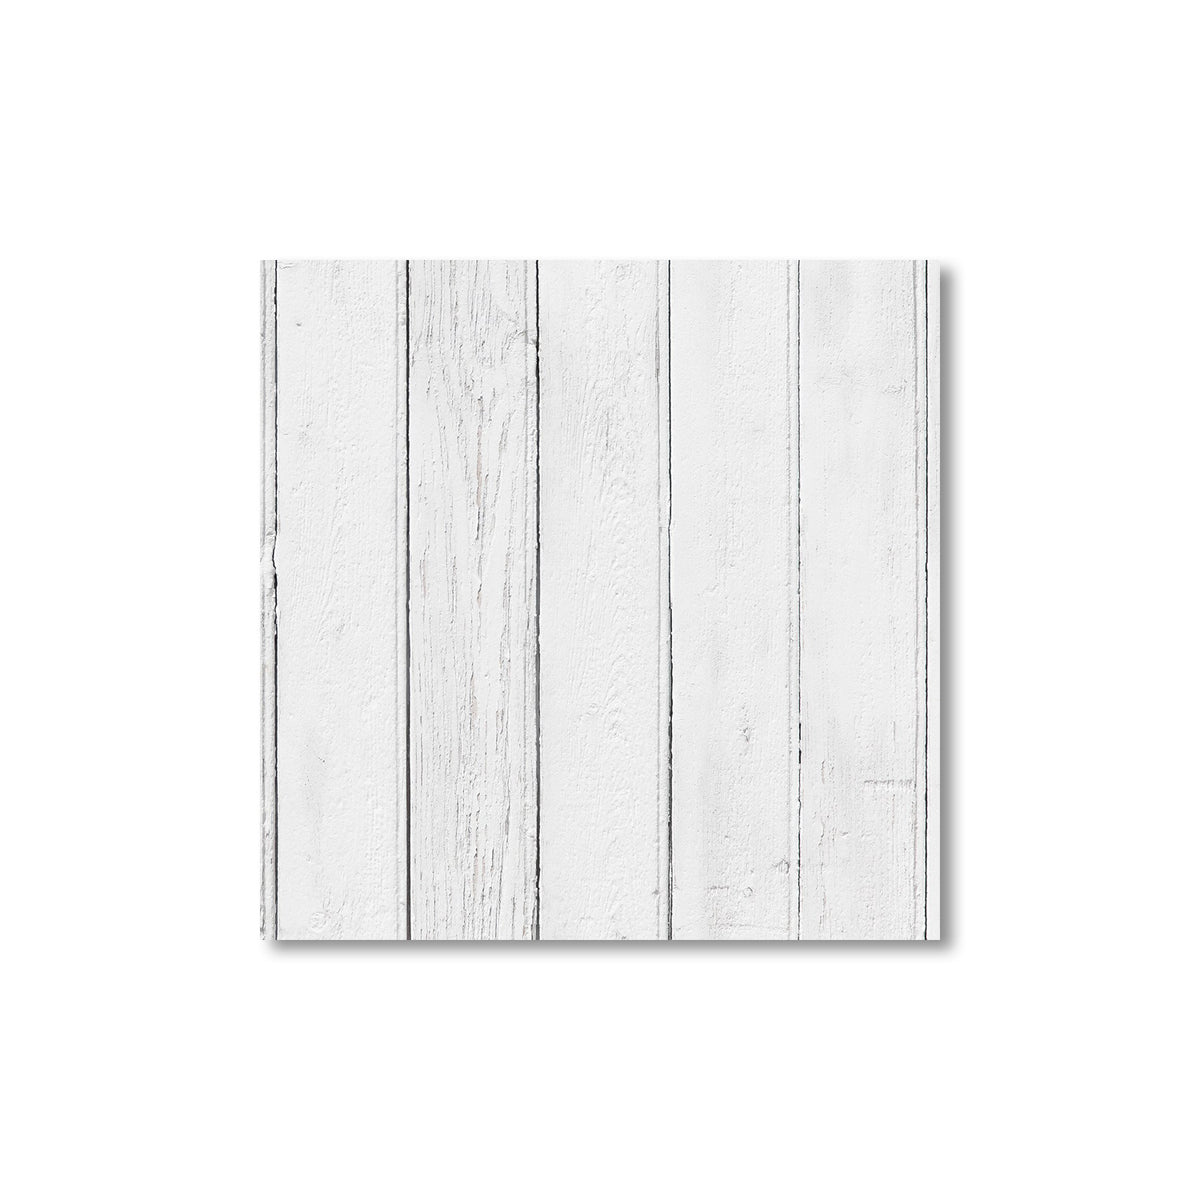 ST IVES Photo Boards® Photography Backdrop